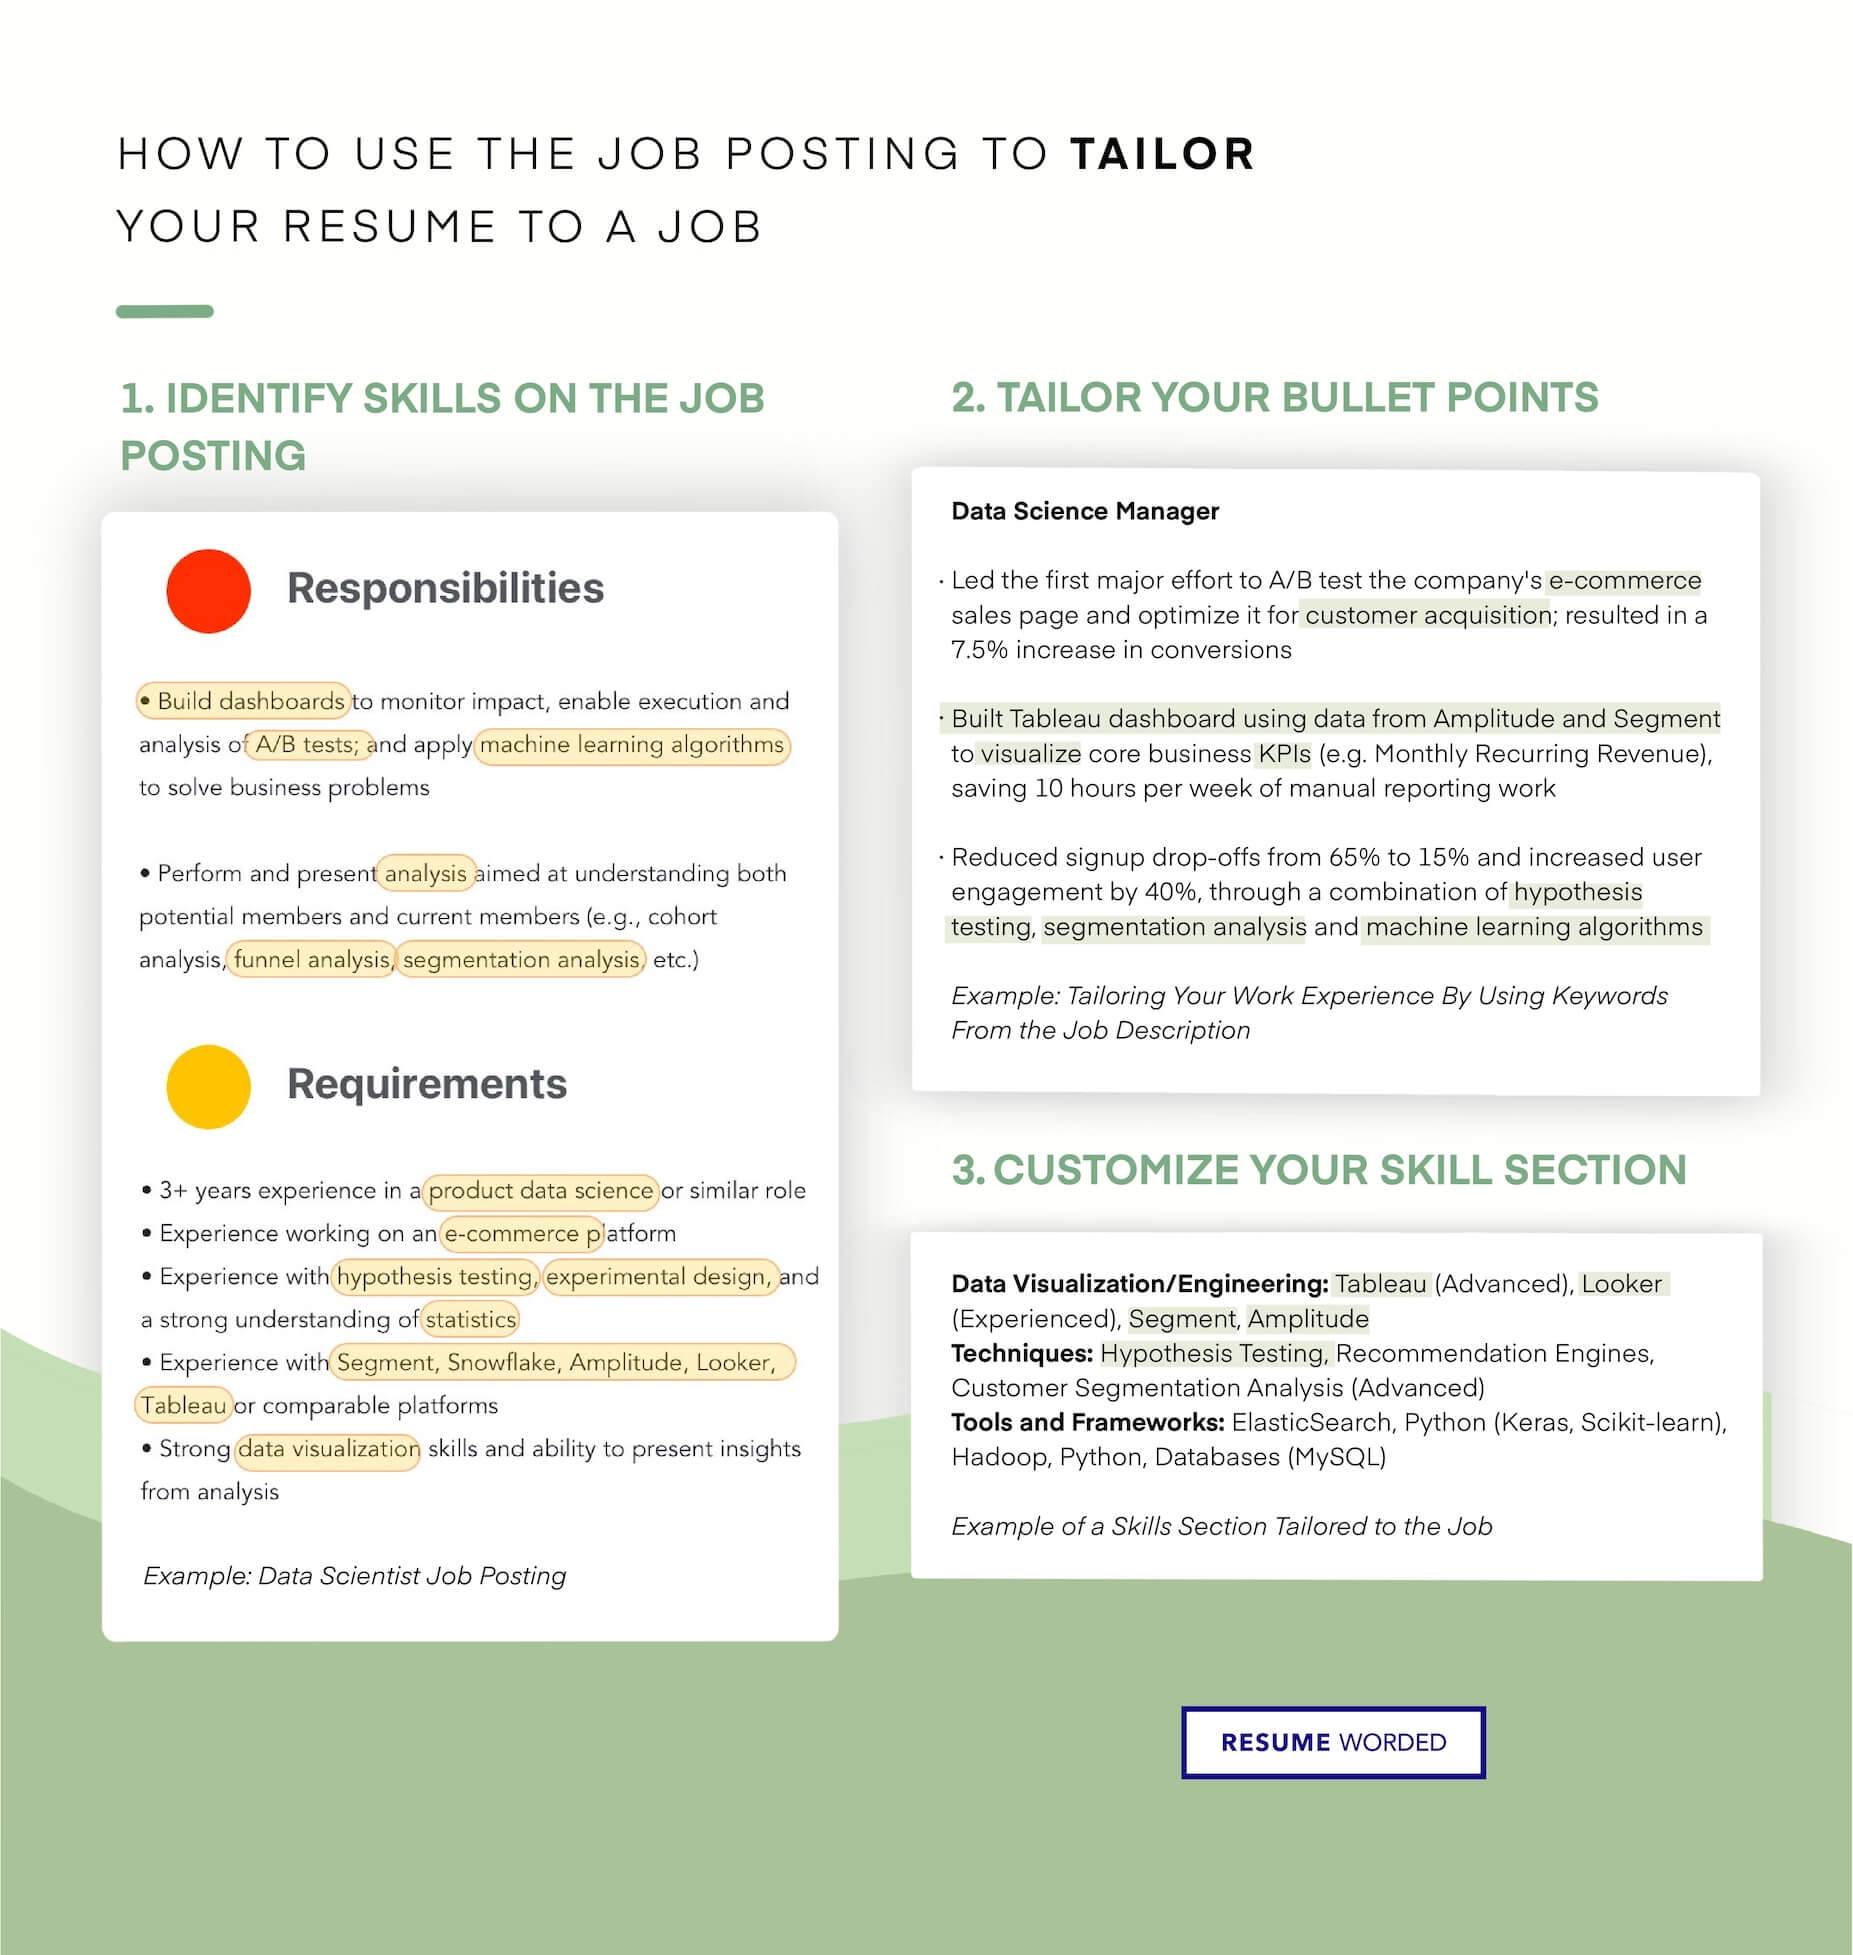 Tailor your resume to the service technician position - Service Technician Resume